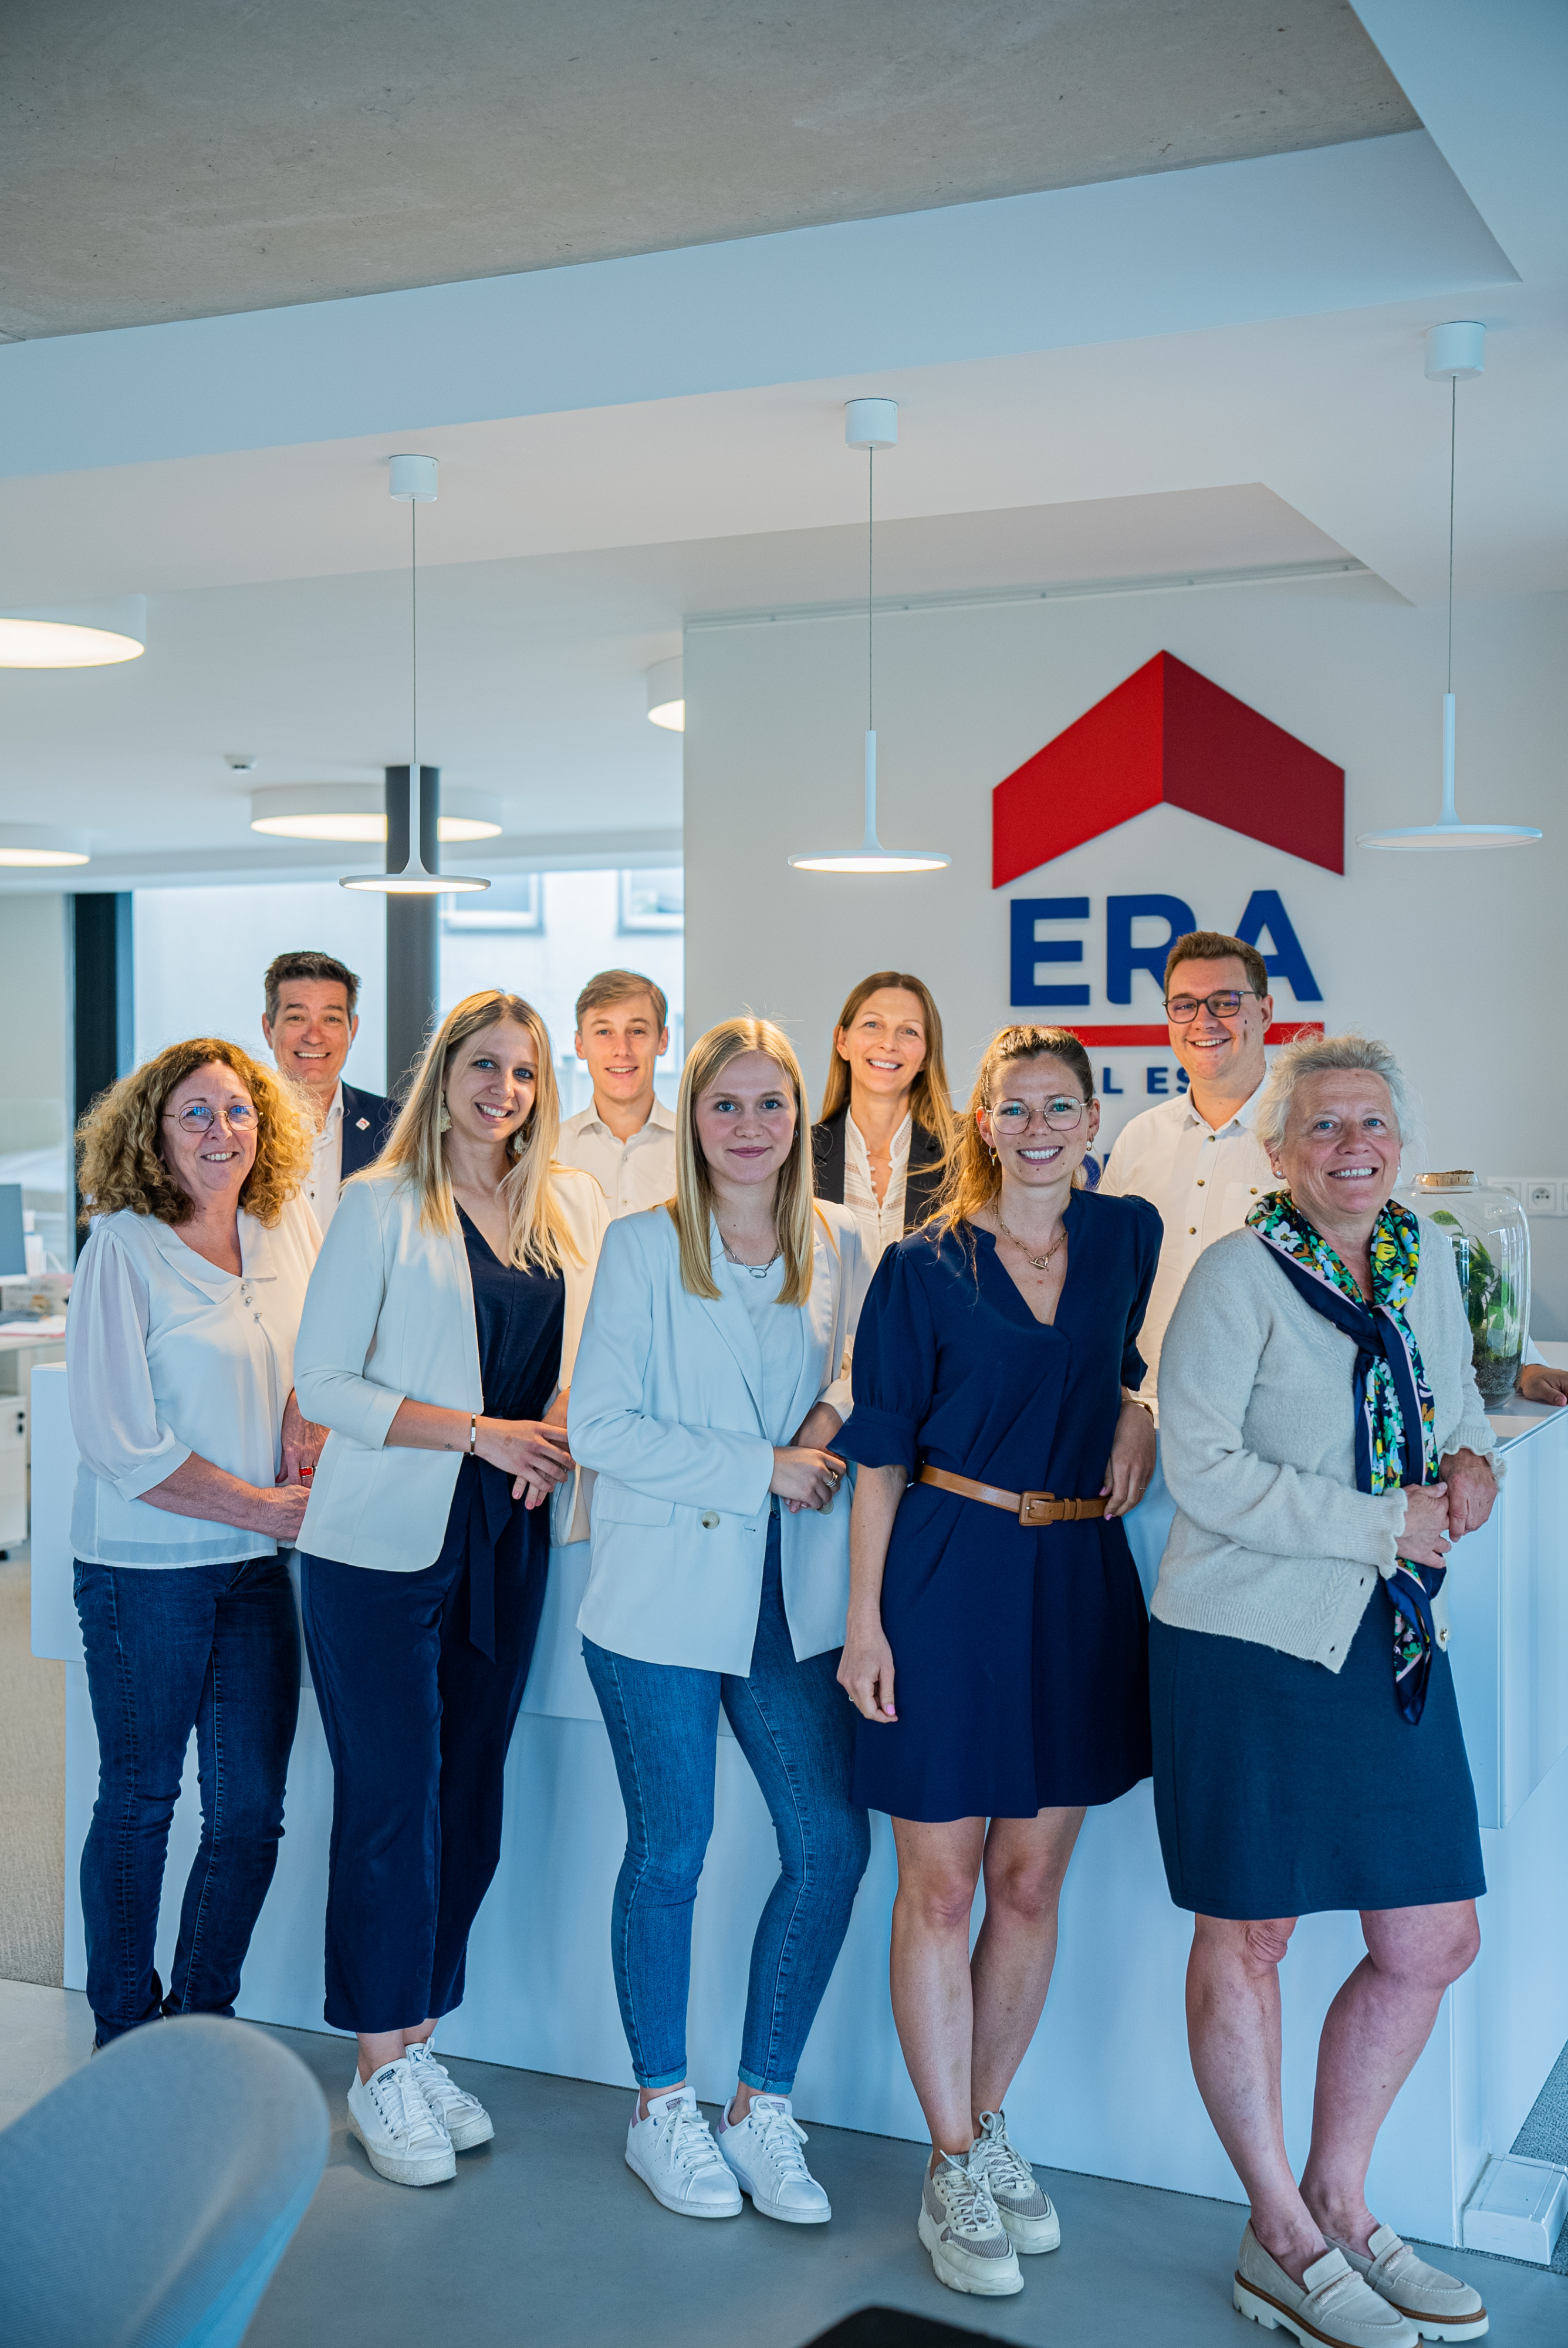 ERA TOPIMMO's team at the front desk.